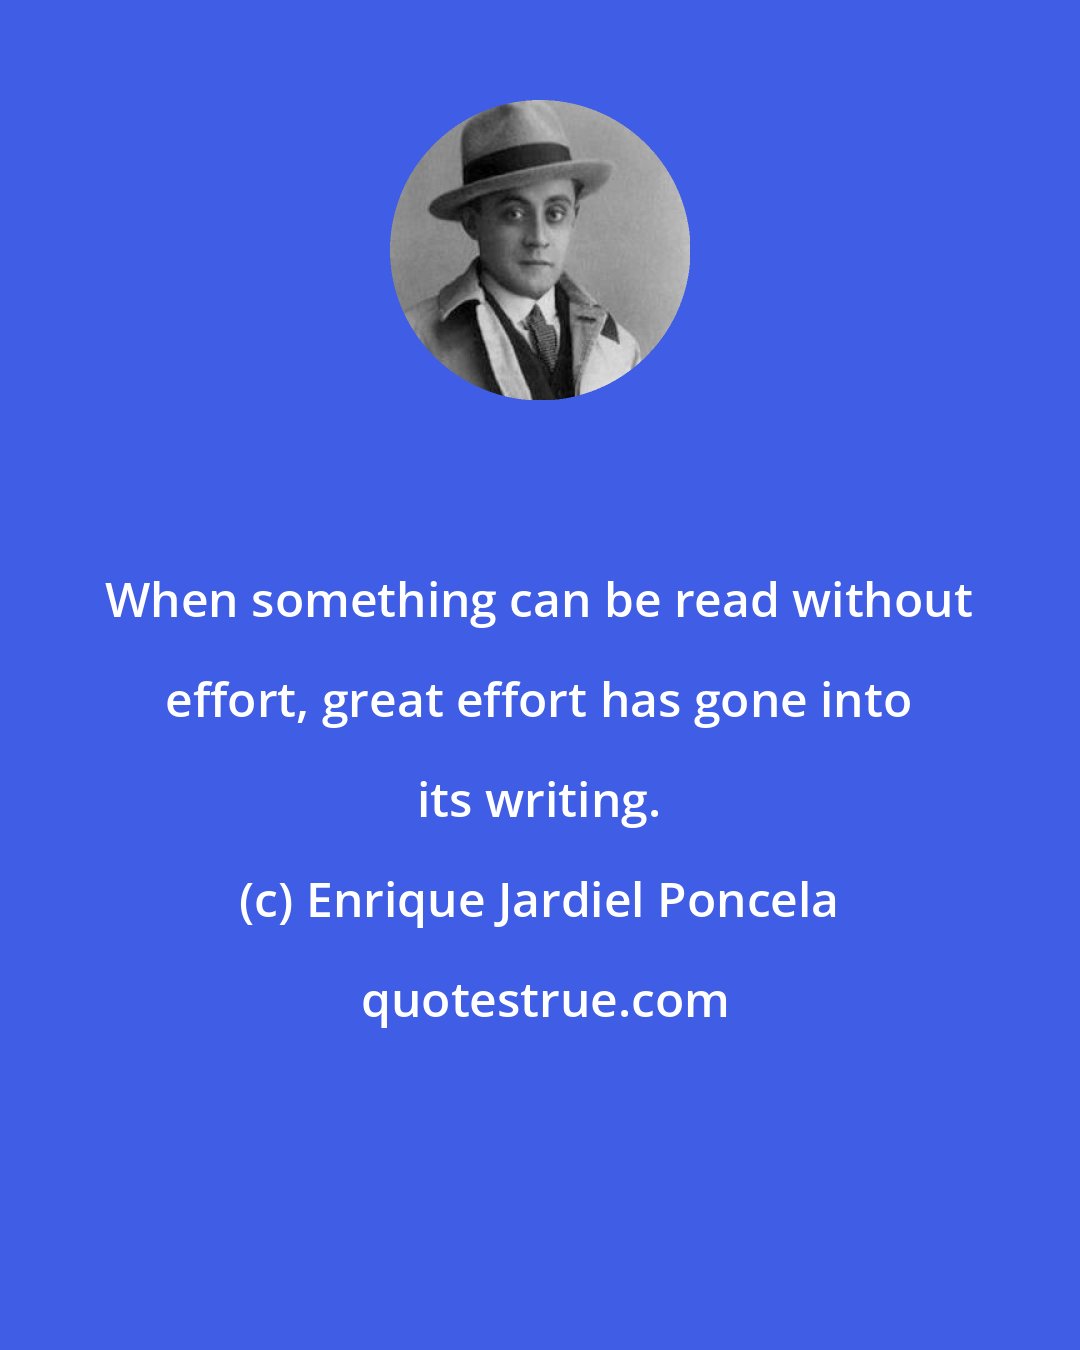 Enrique Jardiel Poncela: When something can be read without effort, great effort has gone into its writing.